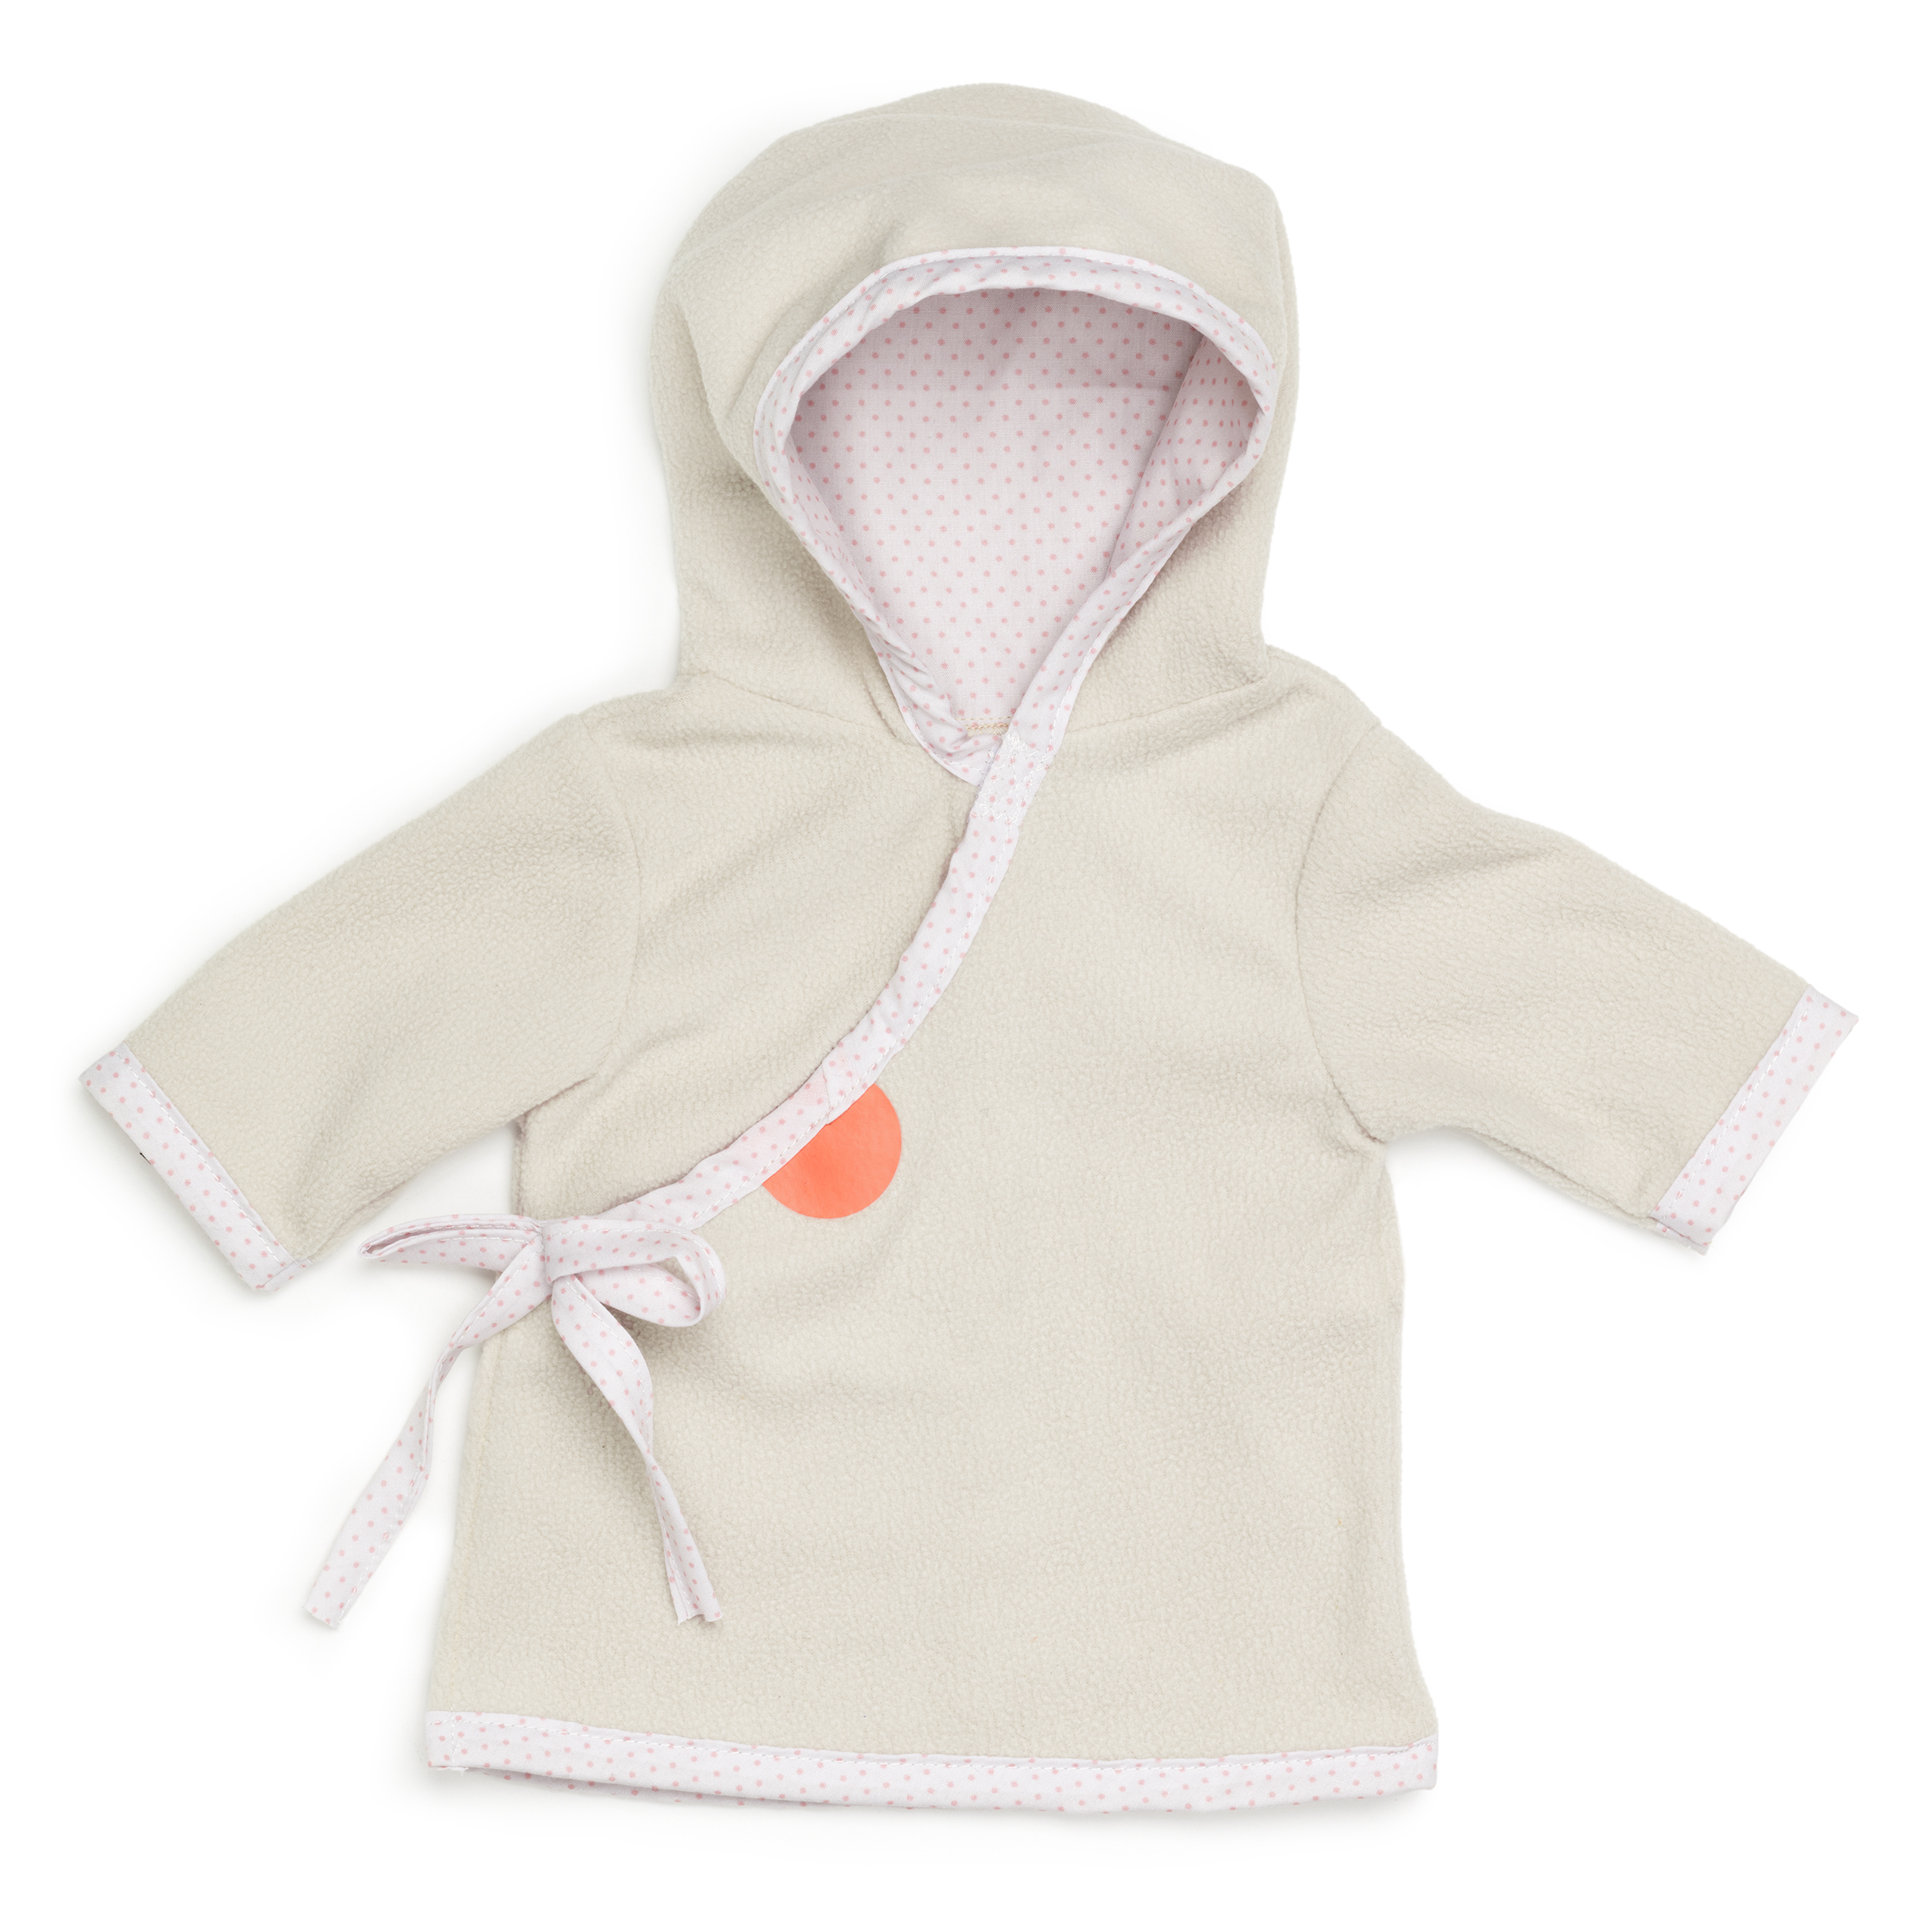 Outlet lundby	doll clothes dressing gown 45 cm